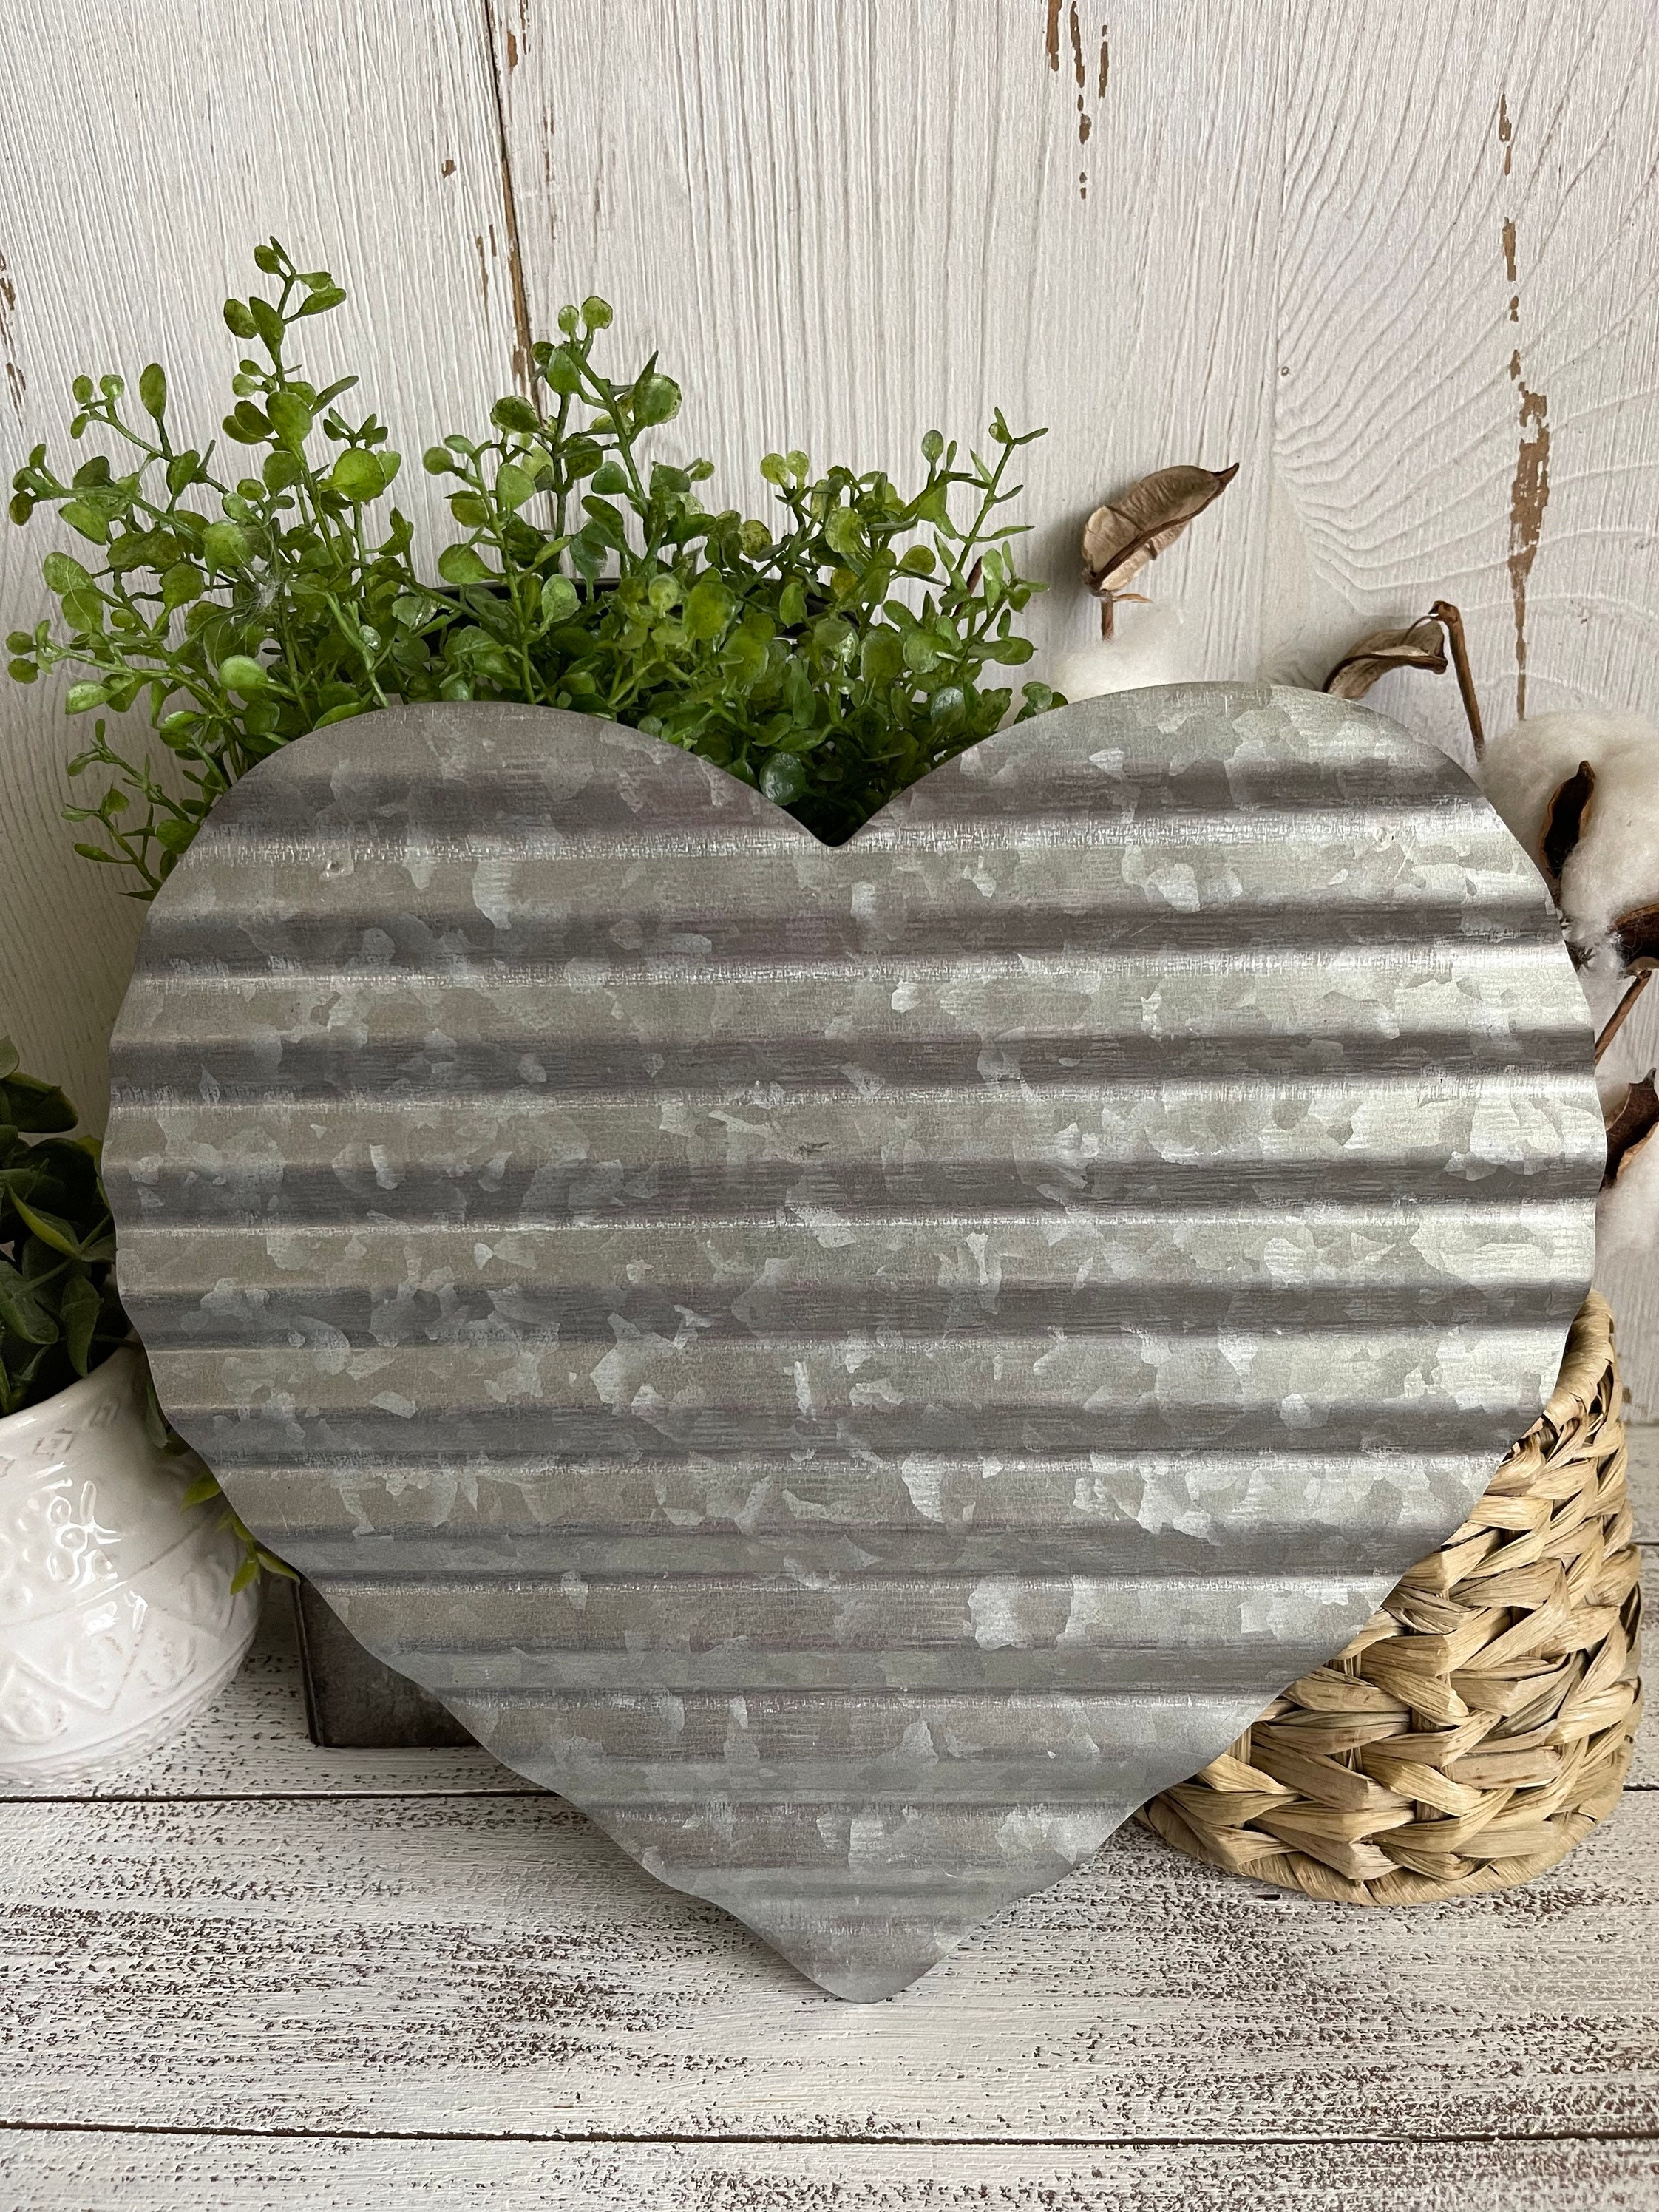 Hotop 3 Pcs Galvanized Metal Heart Wall Decor Heart Hanging Decorations  Corrugated Metal Galvanized Steel Decorations Rustic Heart Decor for Home